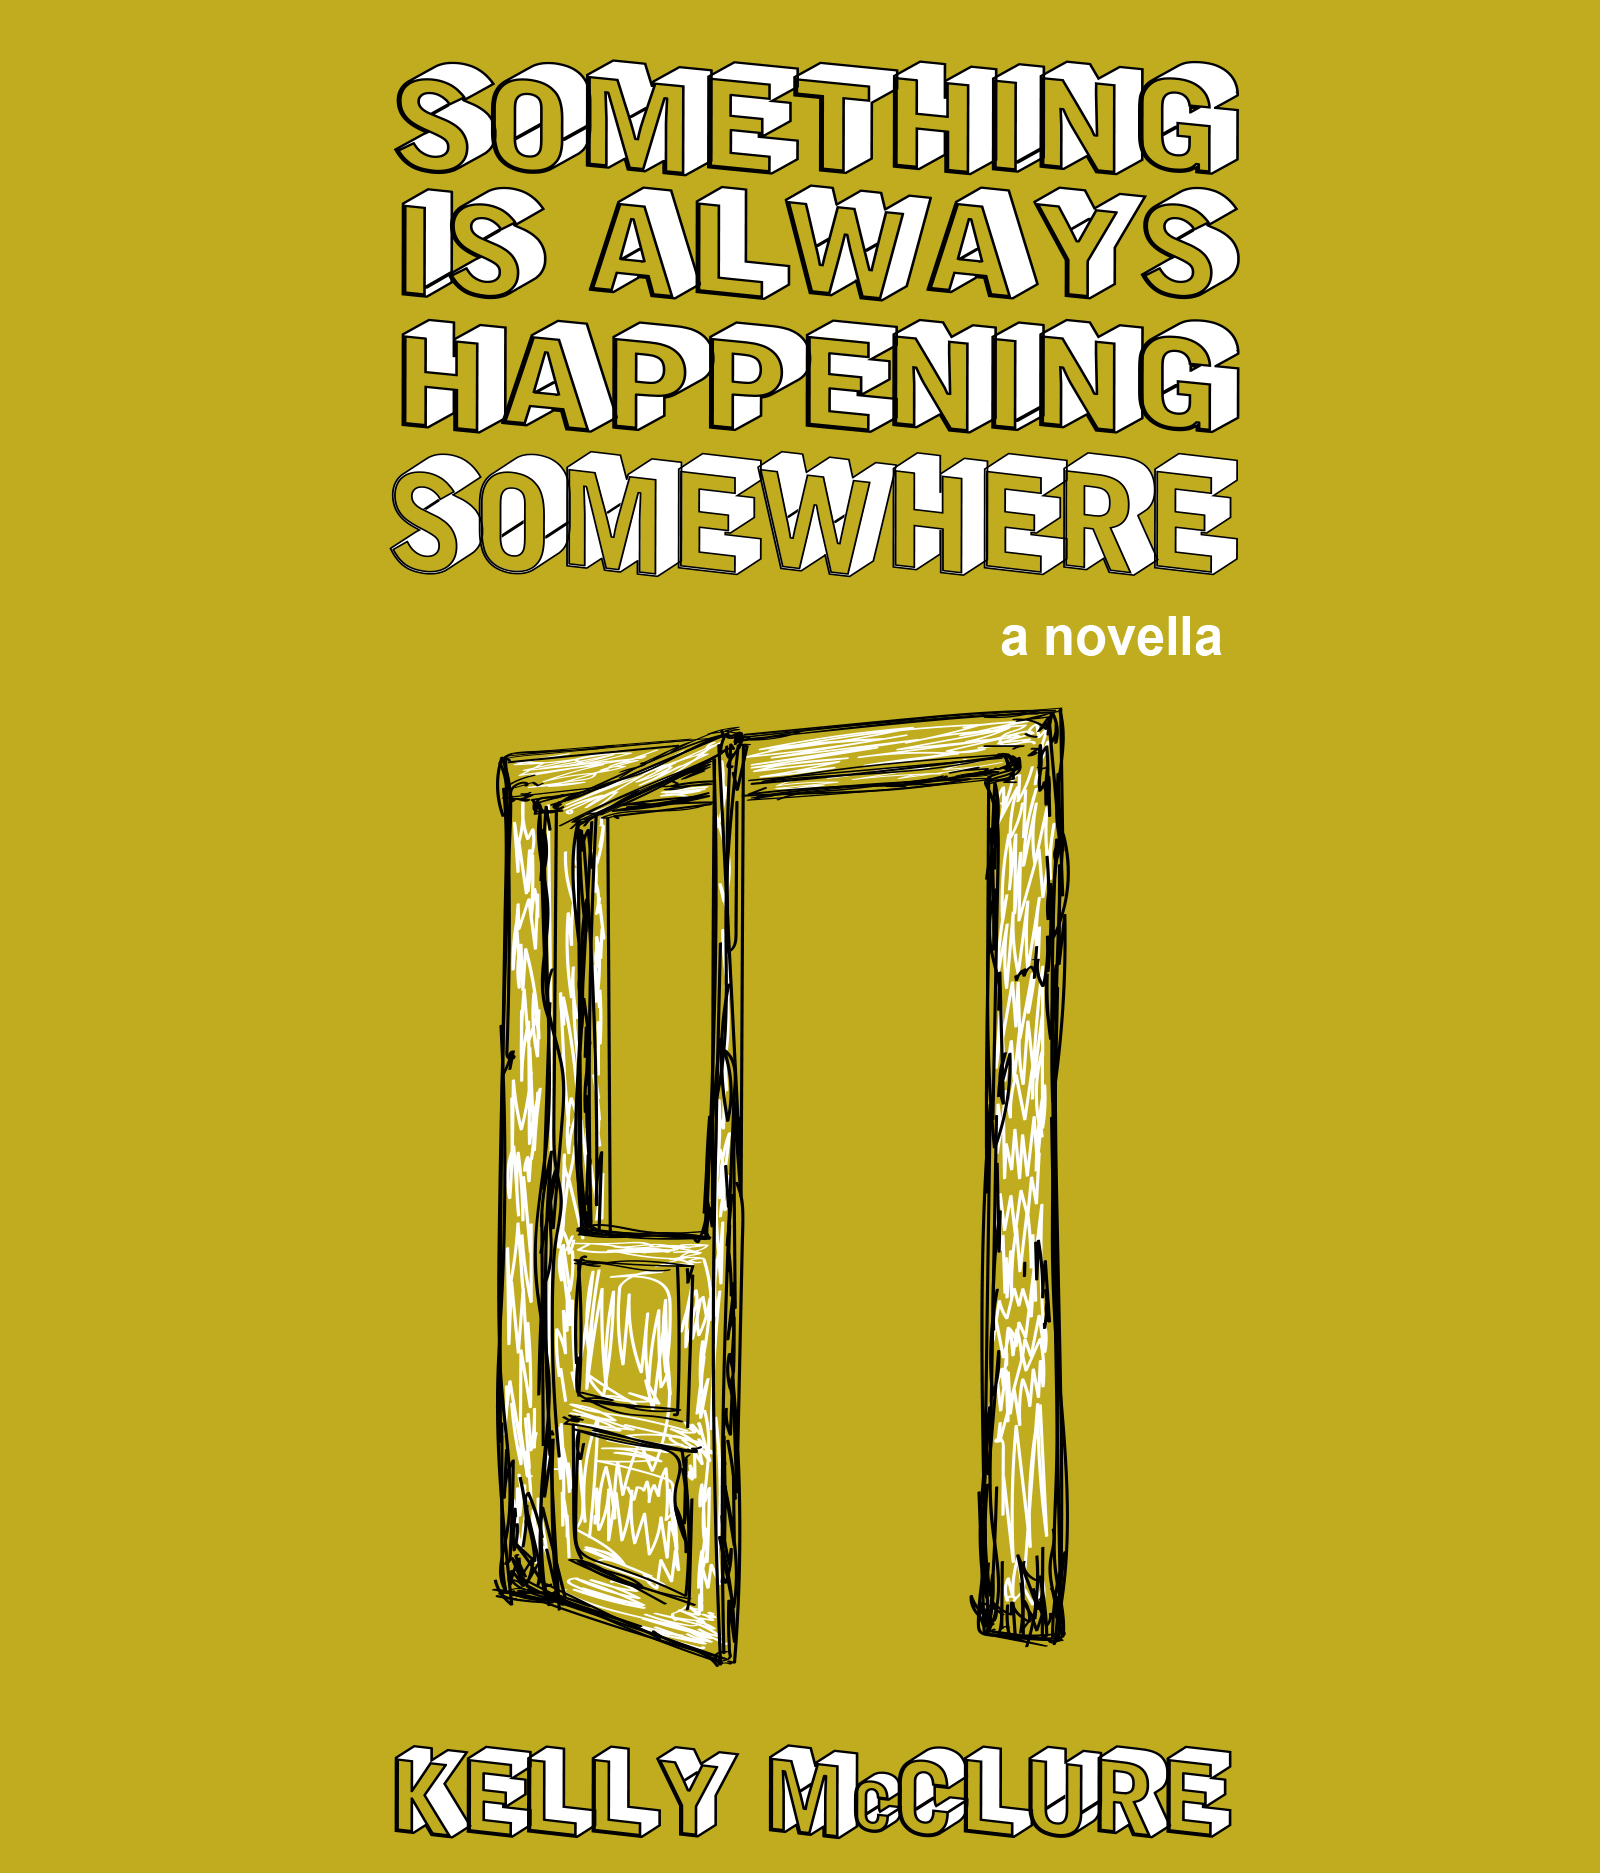 SOMETHING IS ALWAYS HAPPENING SOMEWHERE by Kelly McClure